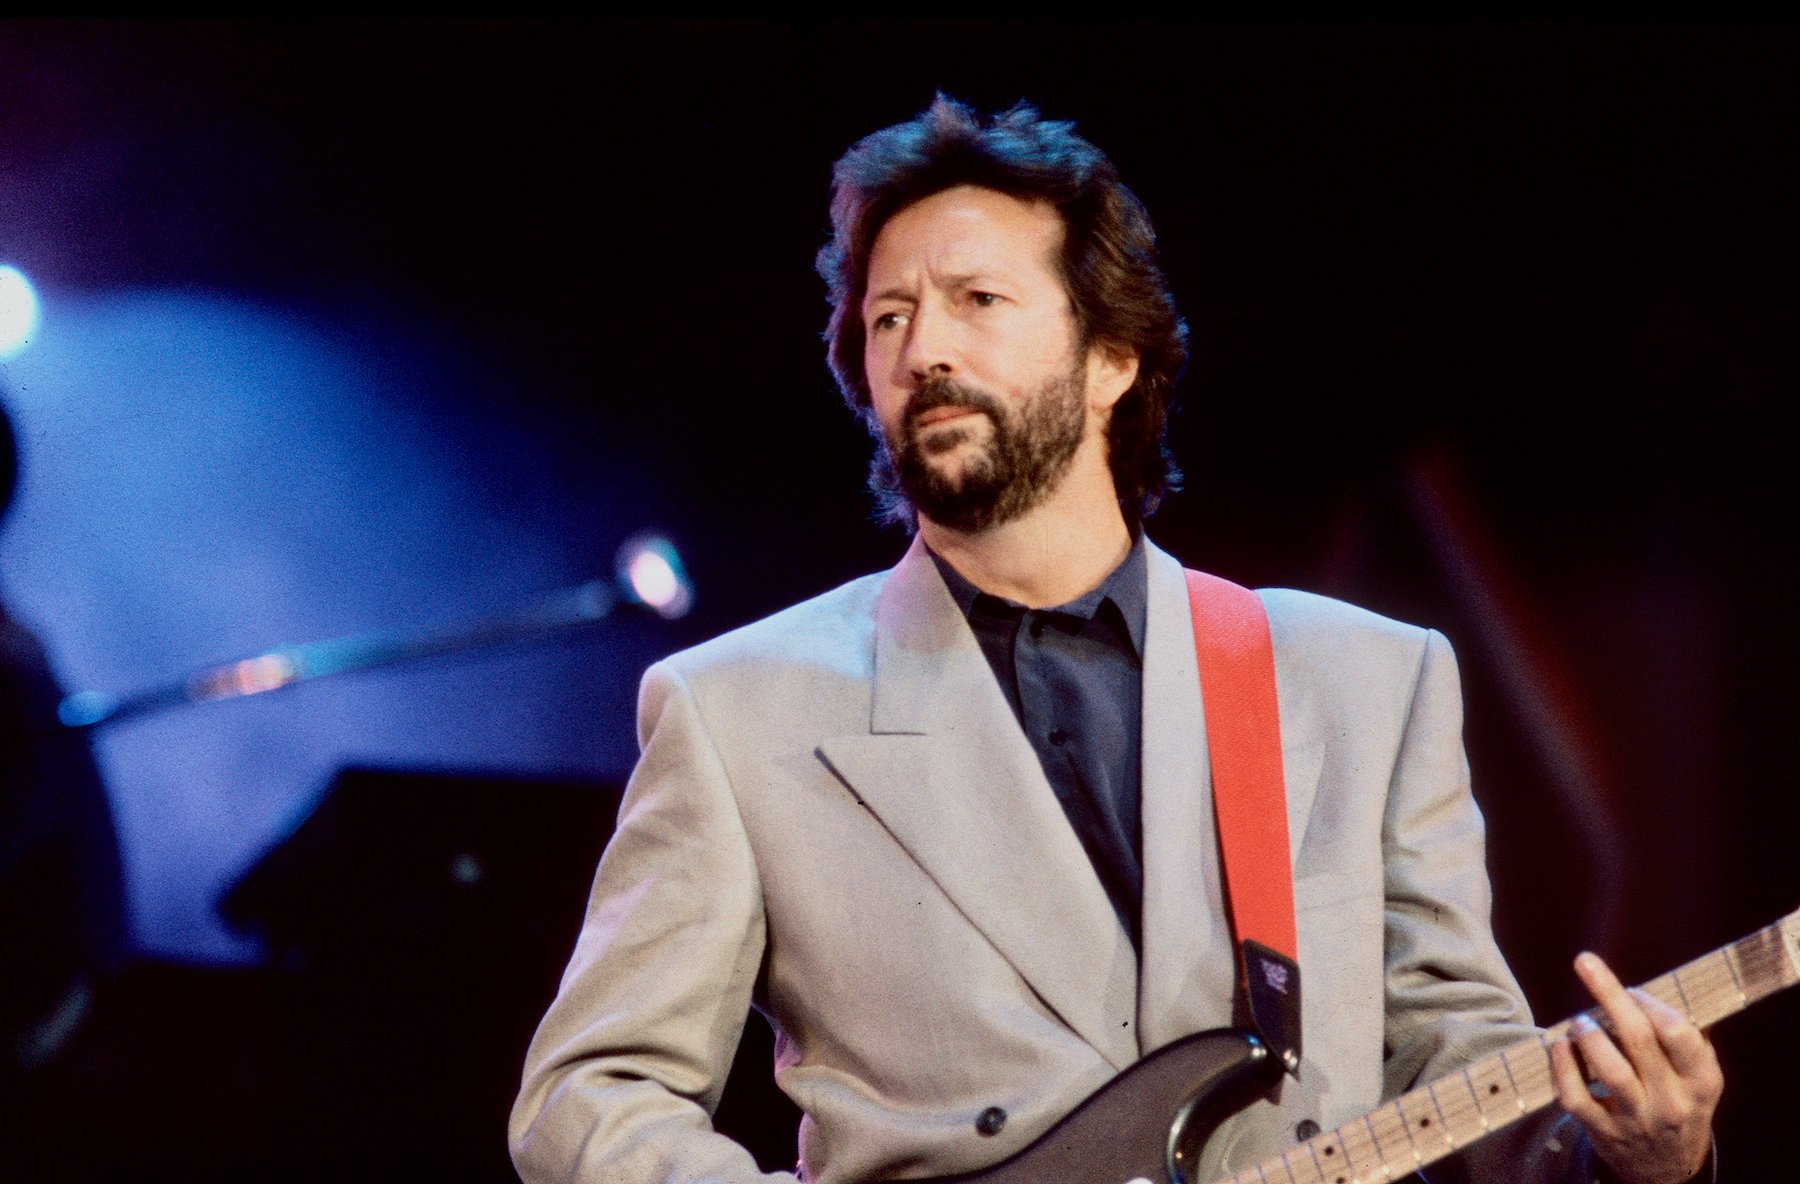 Eric Clapton on stage with a guitar in front of a dark background